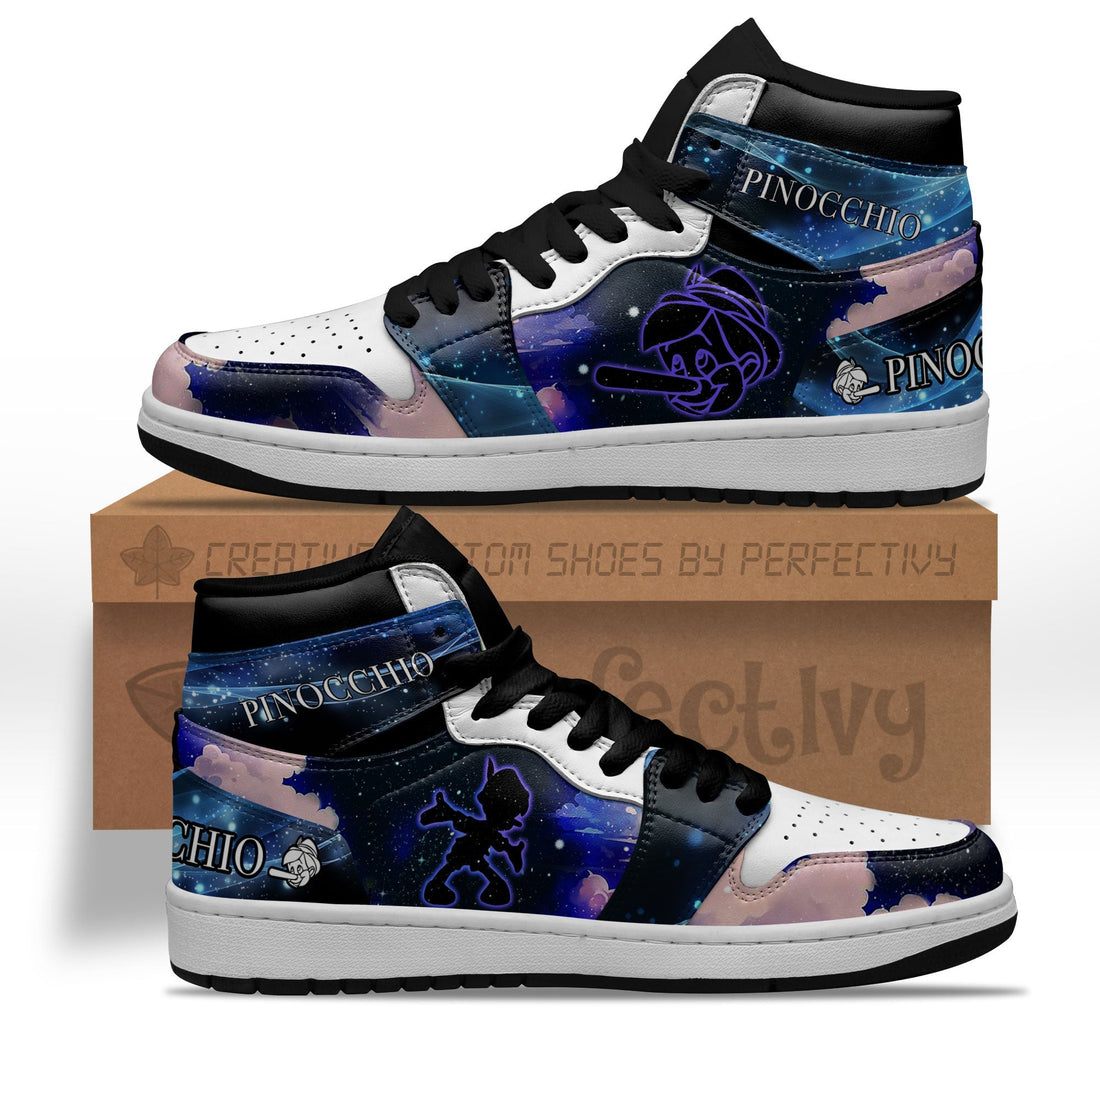 Pinocchio Silhouette J1 Shoes Custom For Fans Sneakers PT10-Gear Wanta